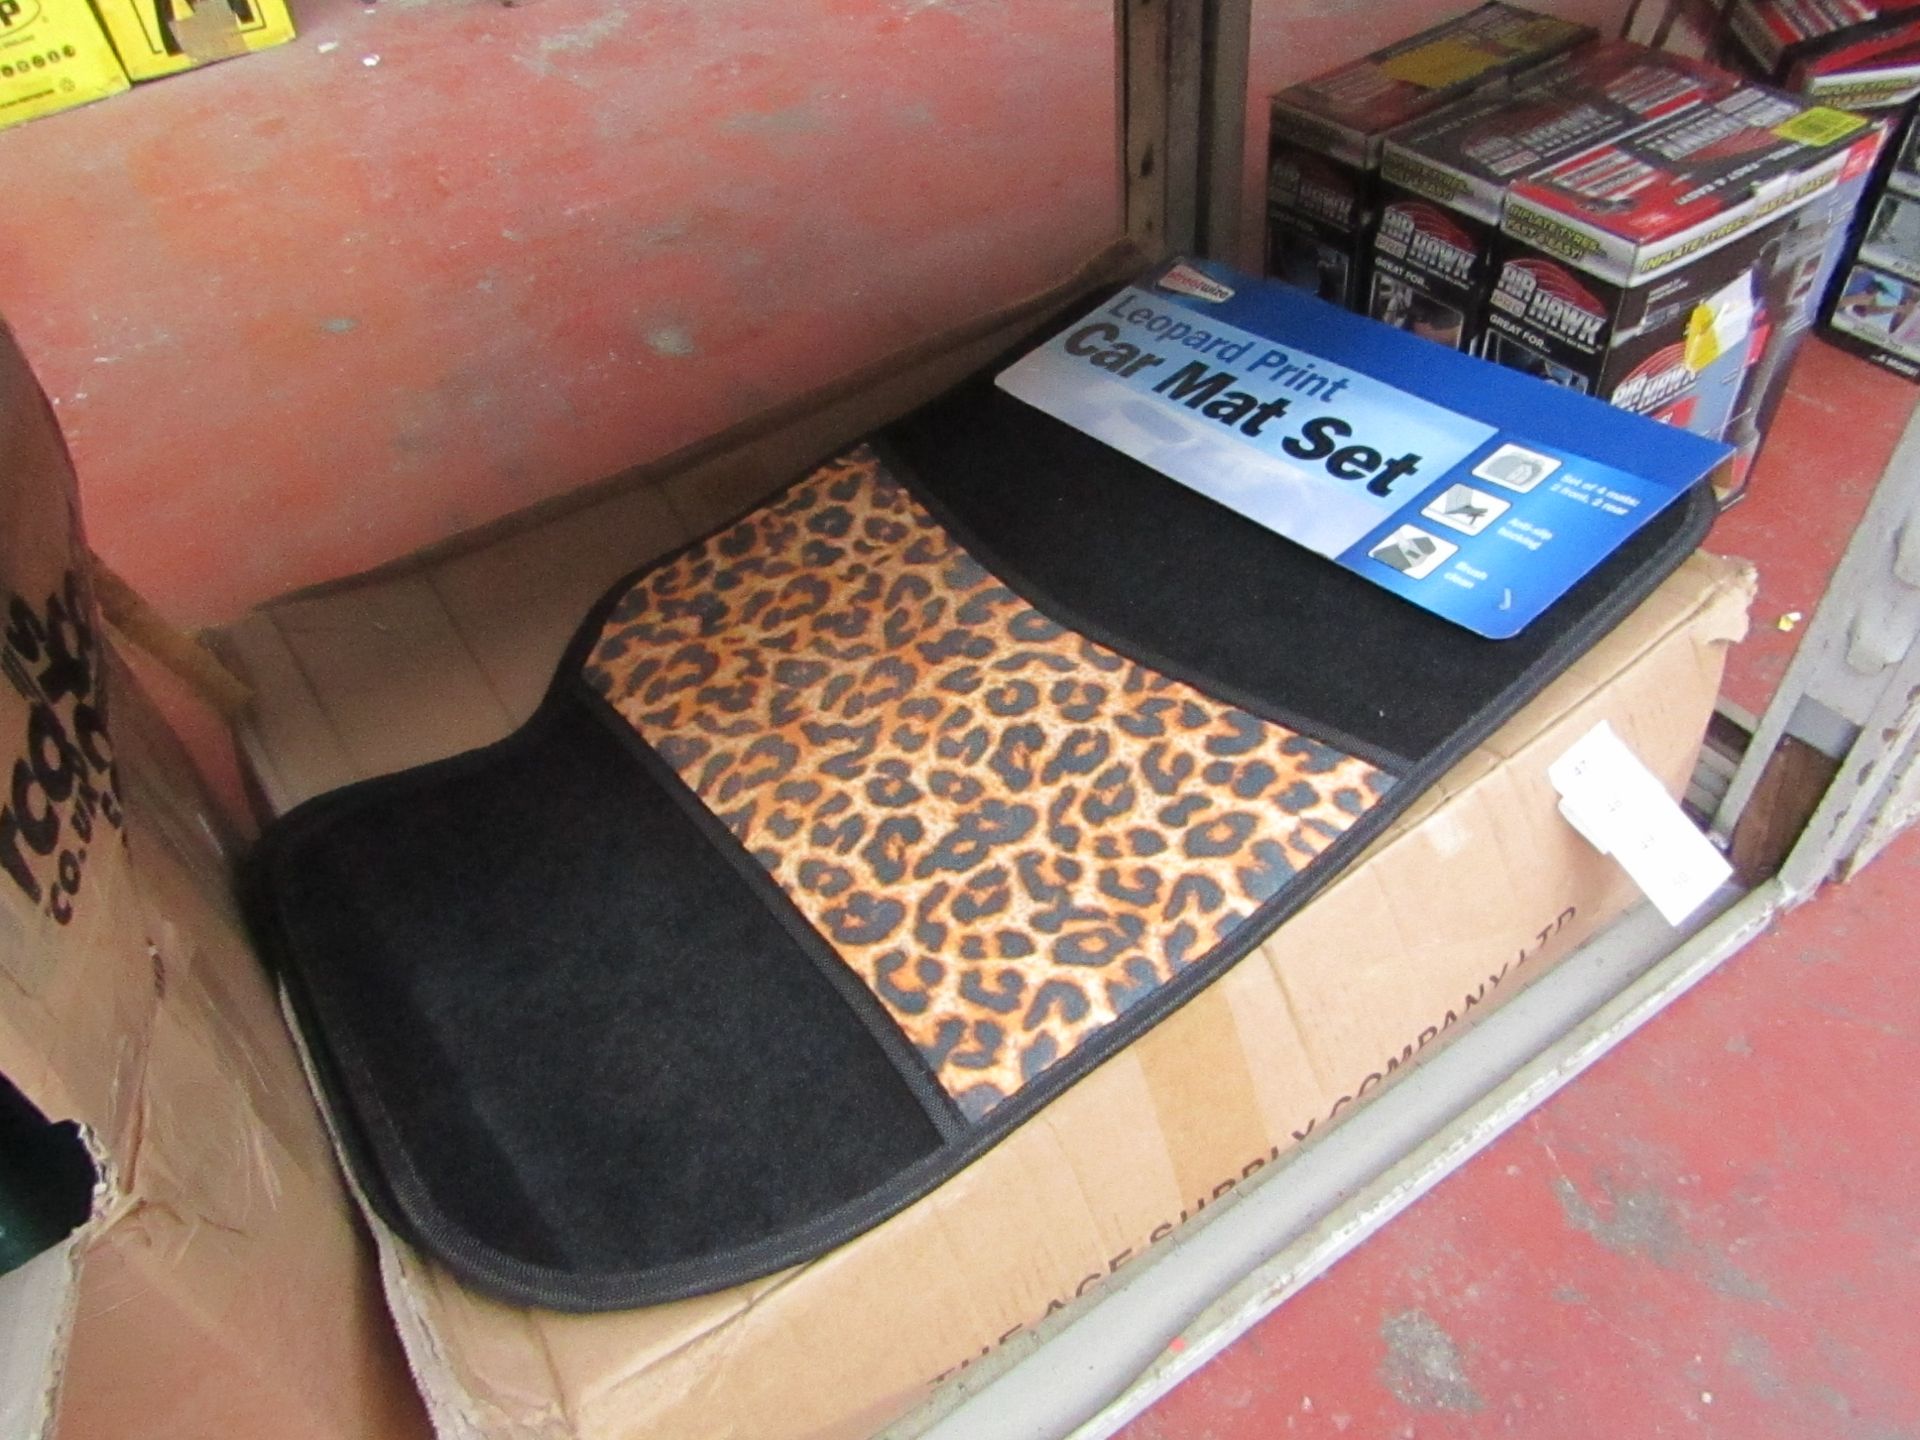 Set of 4 leopard print car mats, new and packaged.